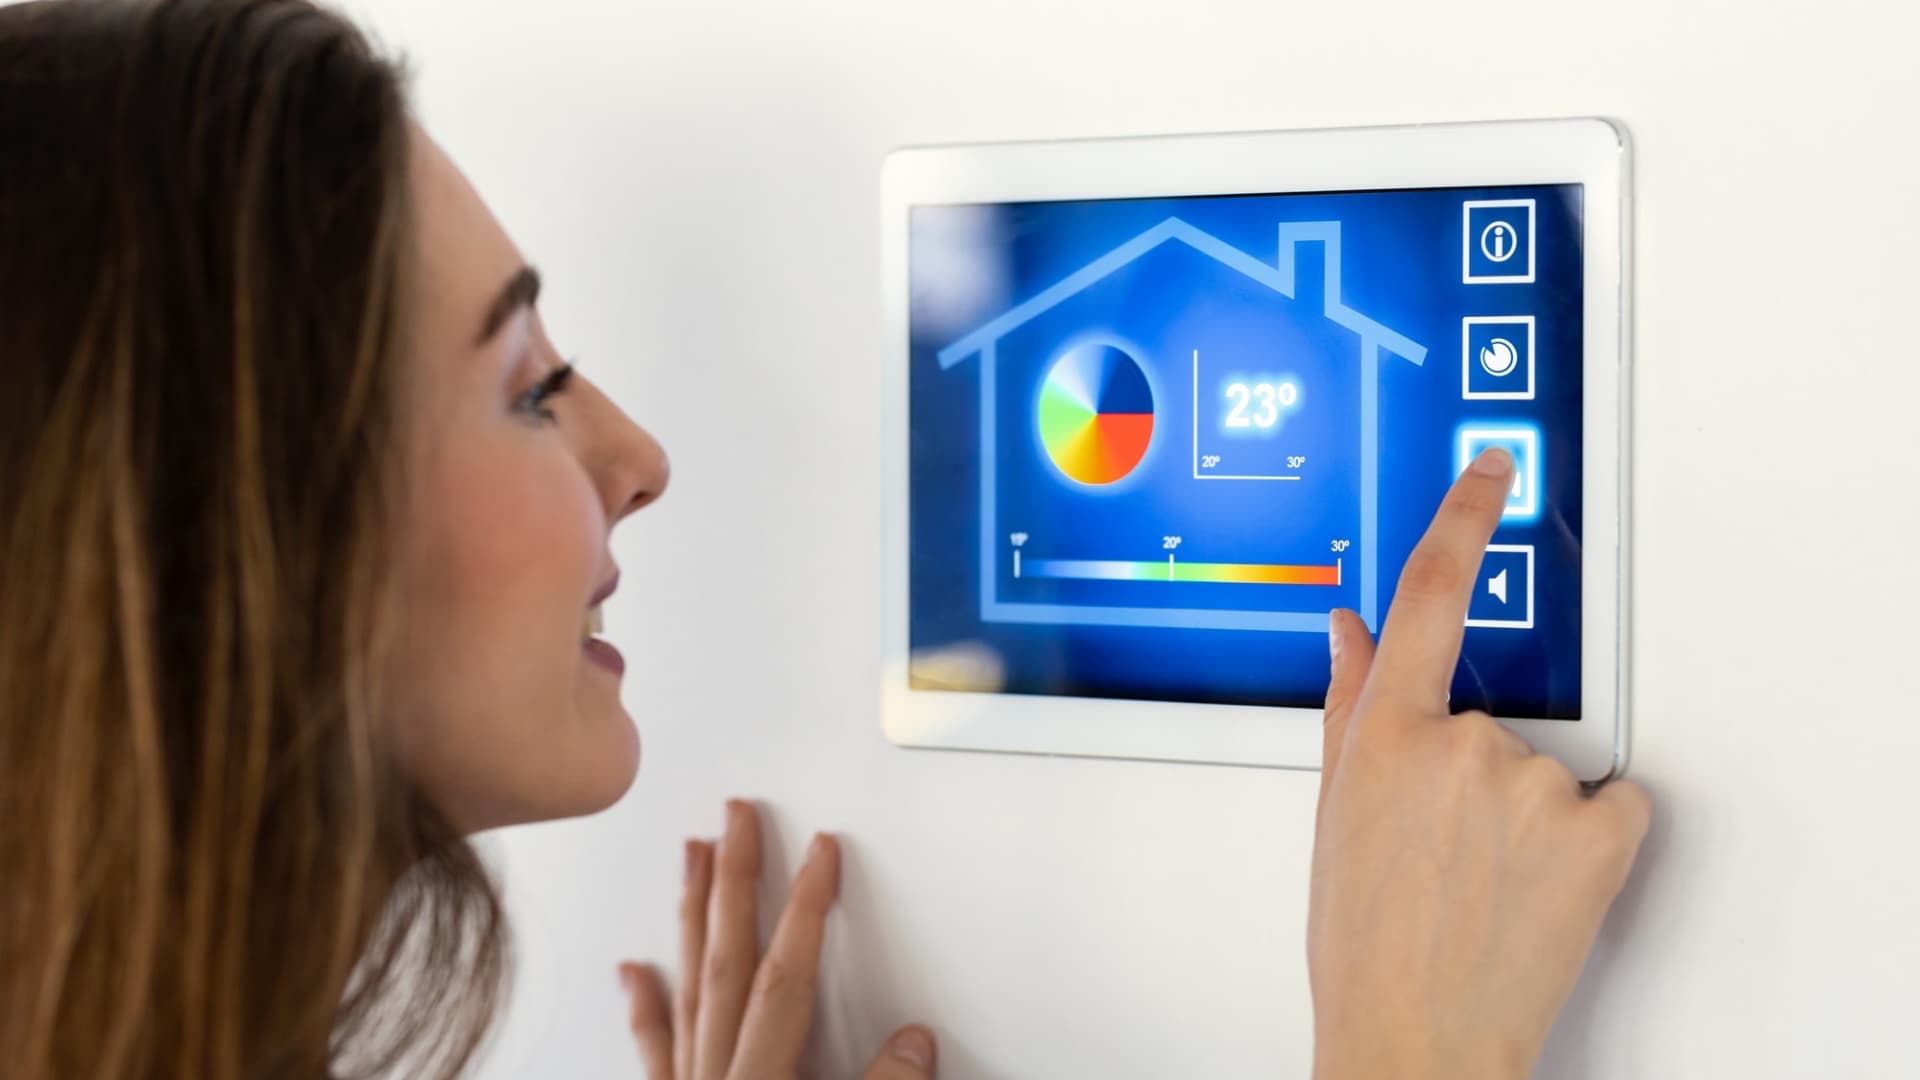 Home Automation - DNA Group Markets